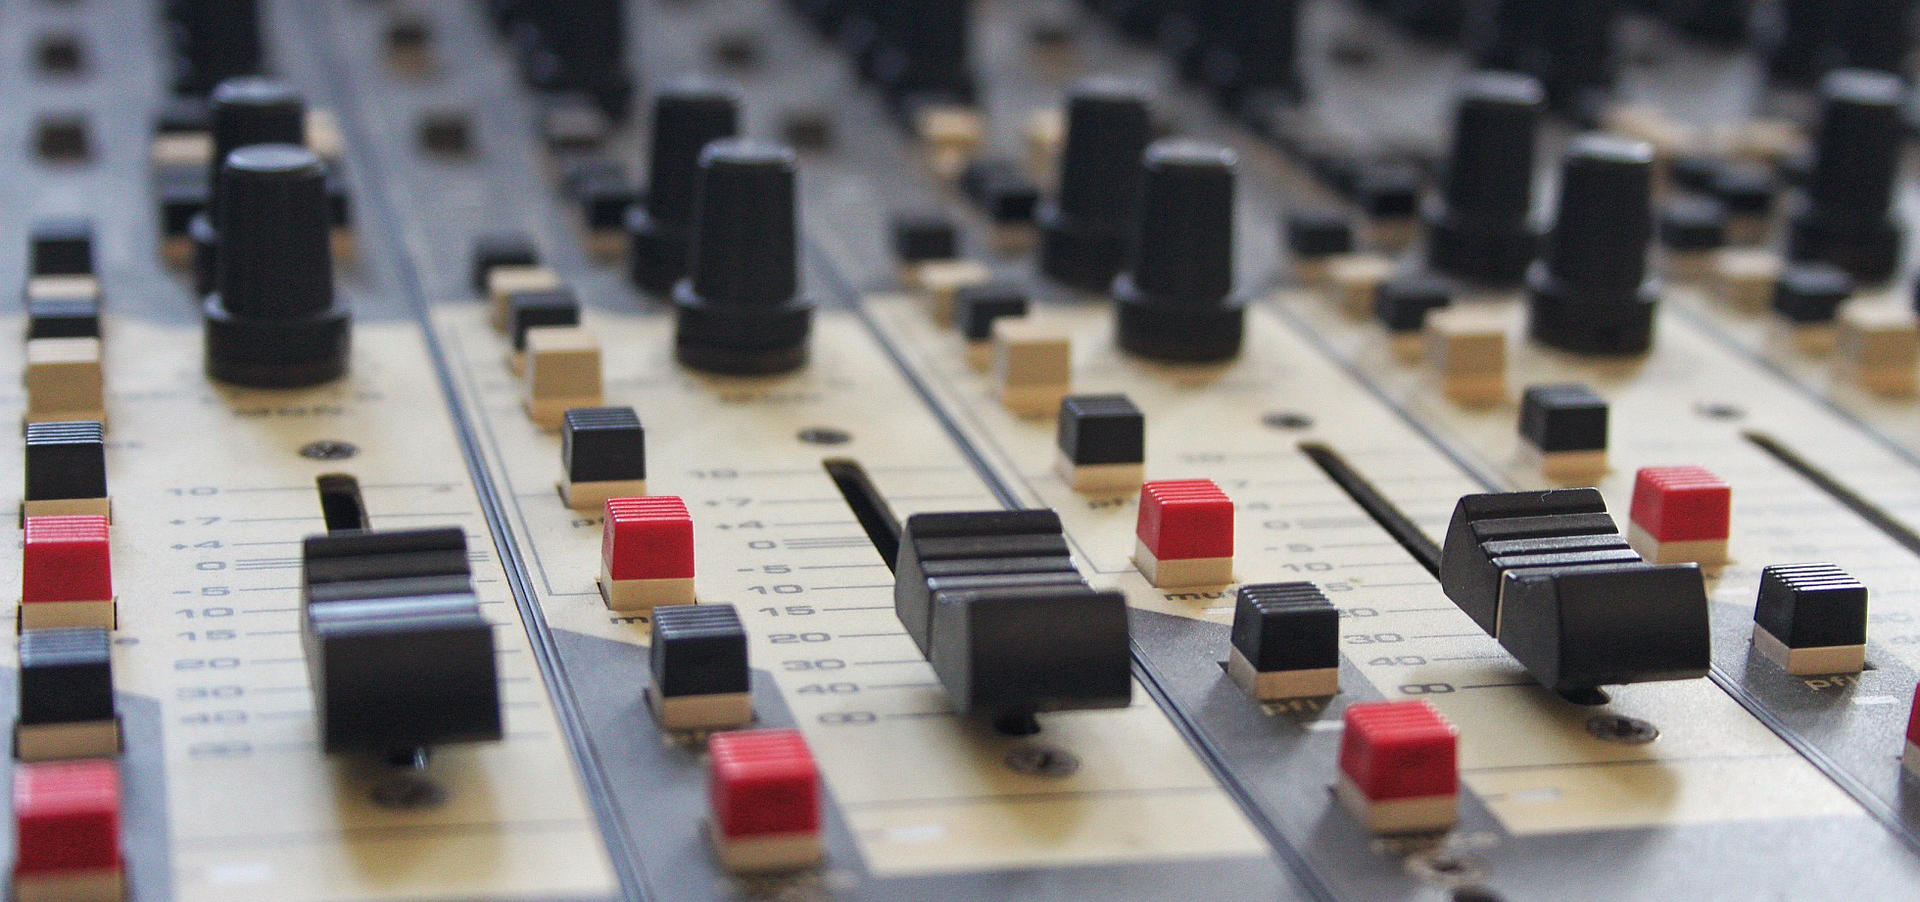 Mixing your music: do it yourself or hire a pro? - Get your music mixed